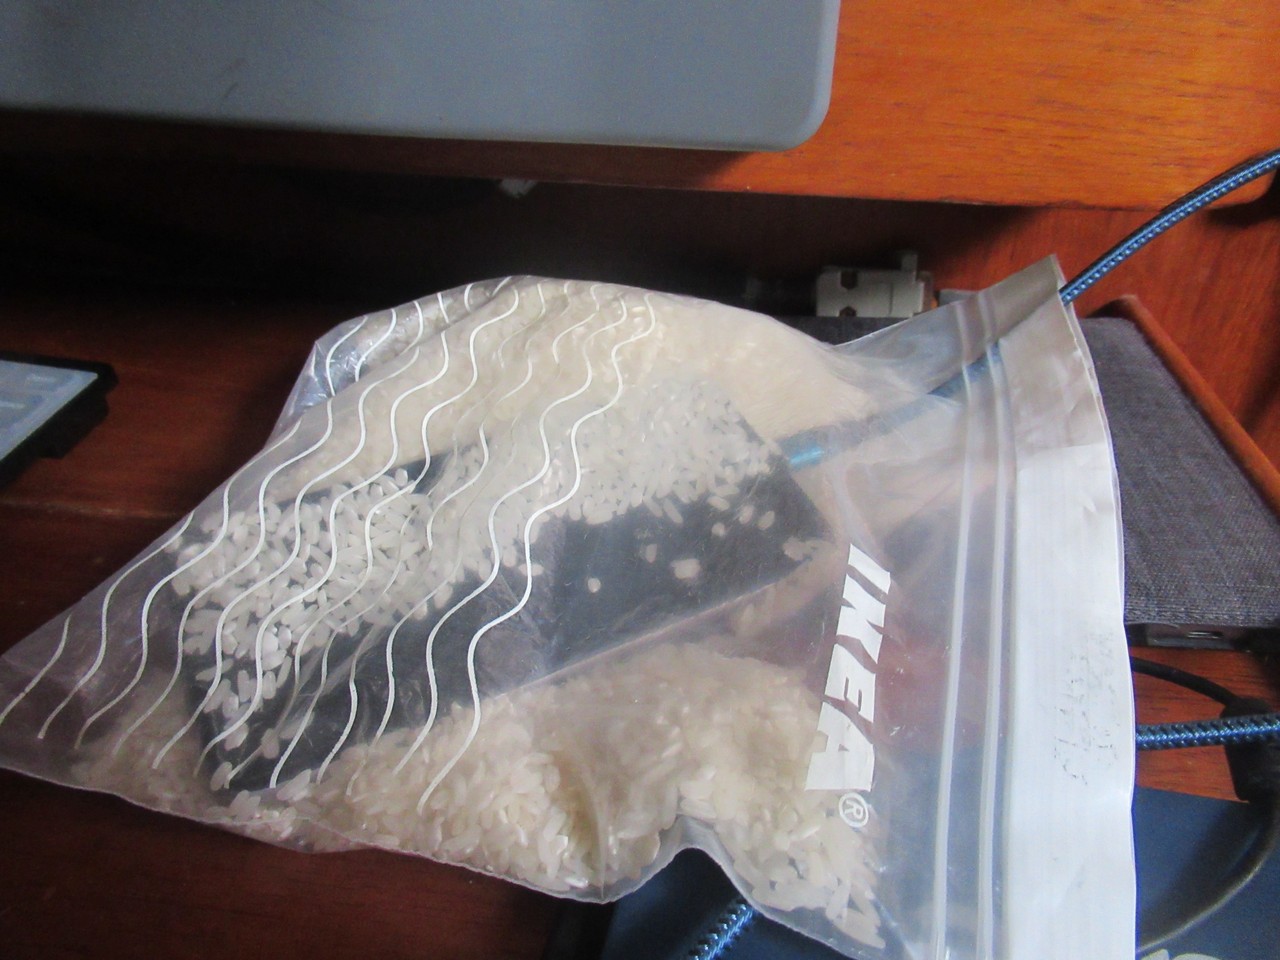 What’s that inside the bag of rice?